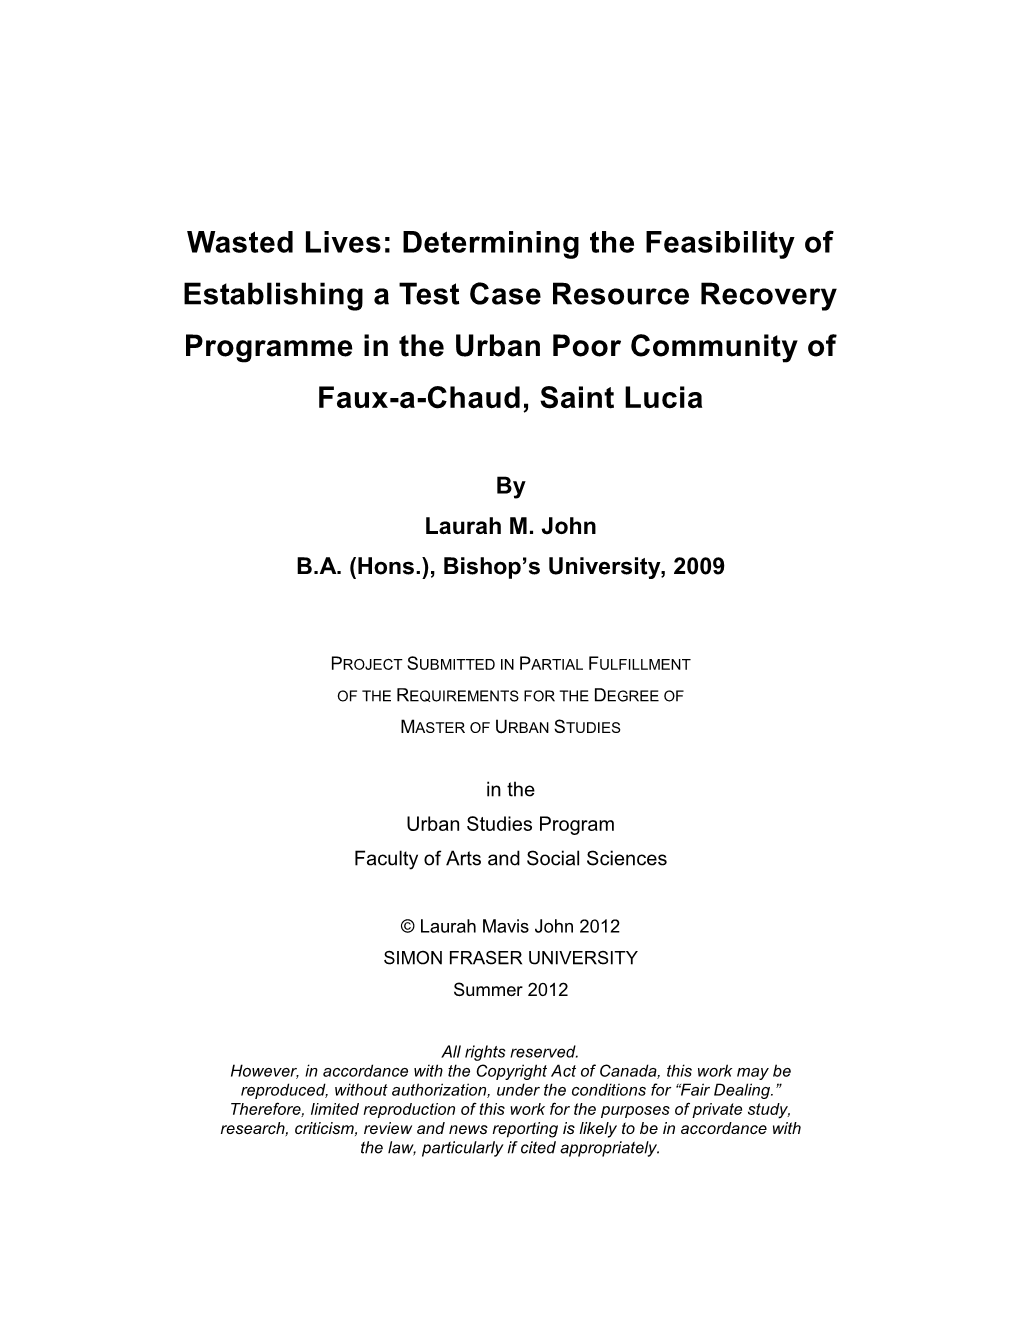 Determining the Feasibility of Establishing a Test Case Resource Recovery Programme in the Urban Poor Community of Faux-A-Chaud, Saint Lucia